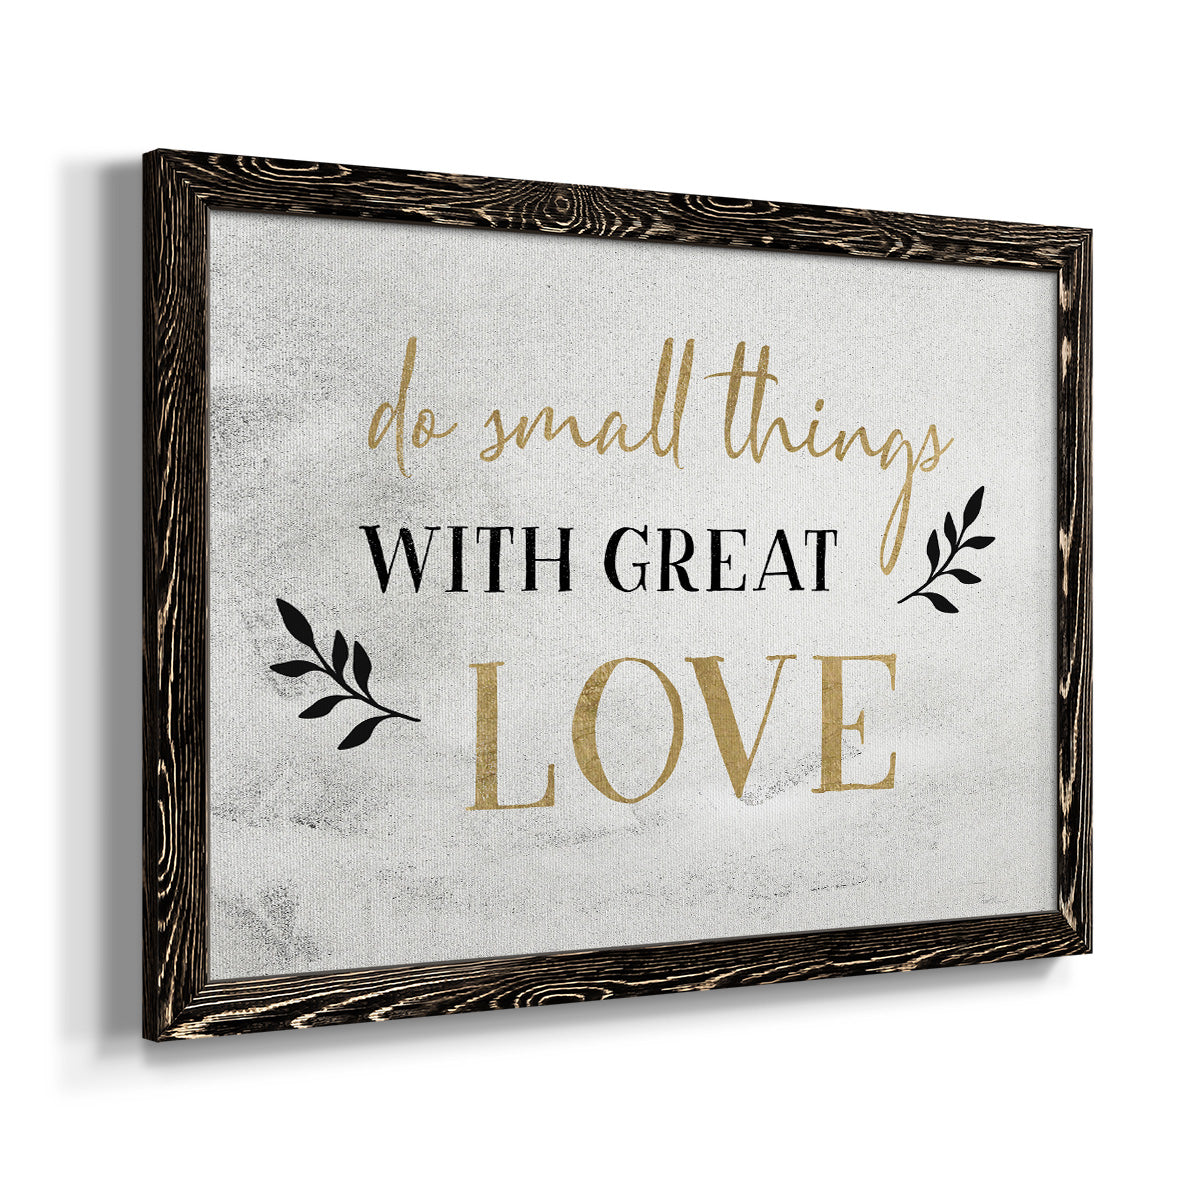 Small Things Gold-Premium Framed Canvas - Ready to Hang